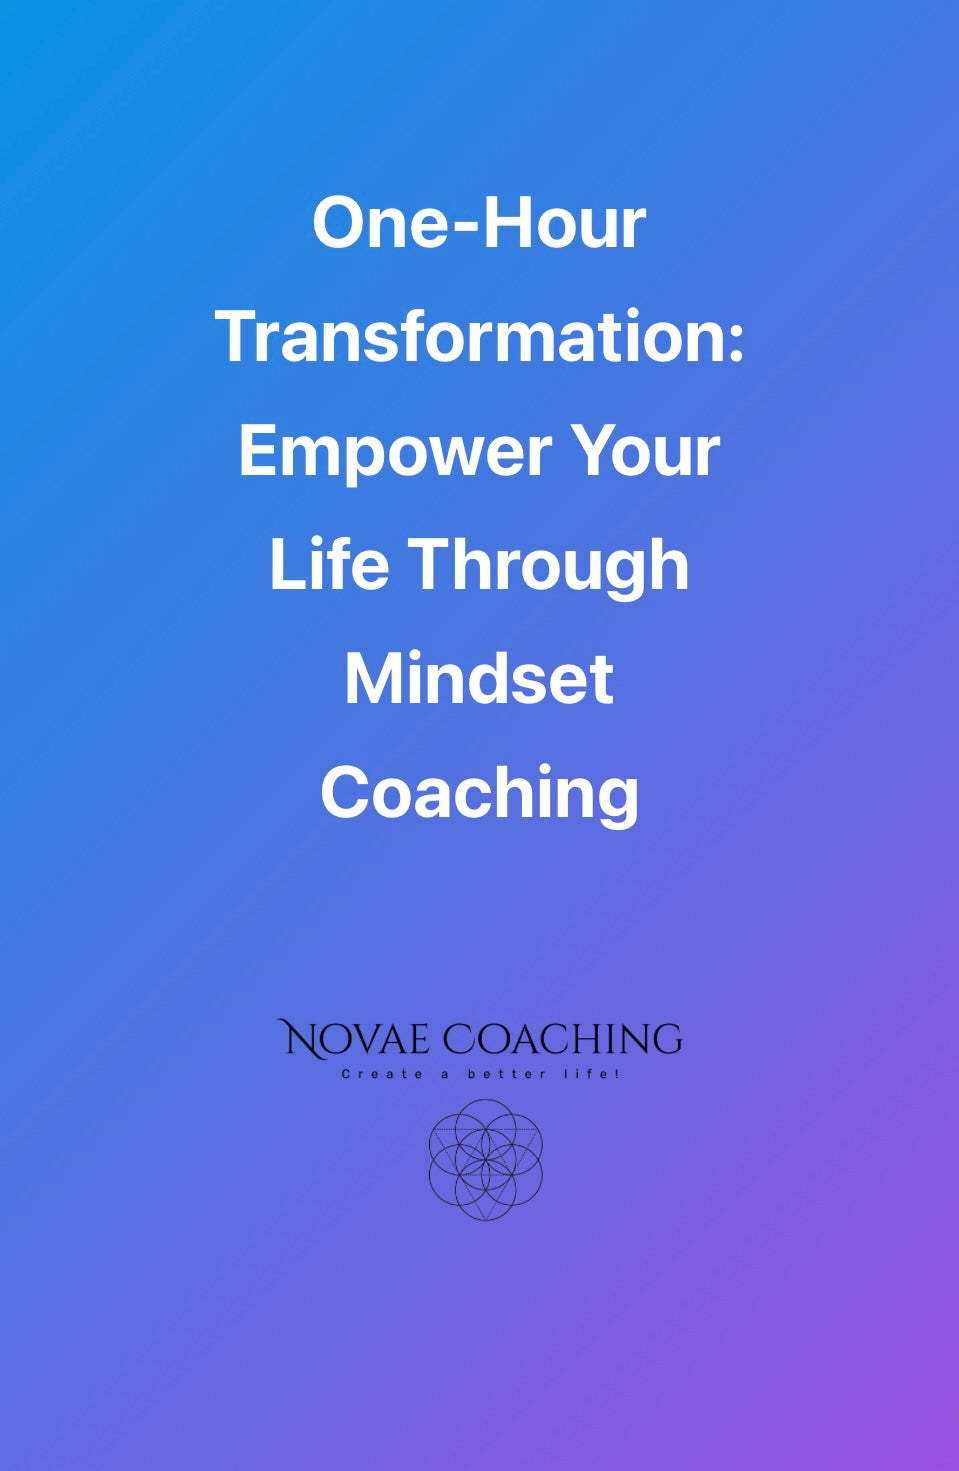 One-Hour Transformation: Empower Your Life Through Mindset Coaching